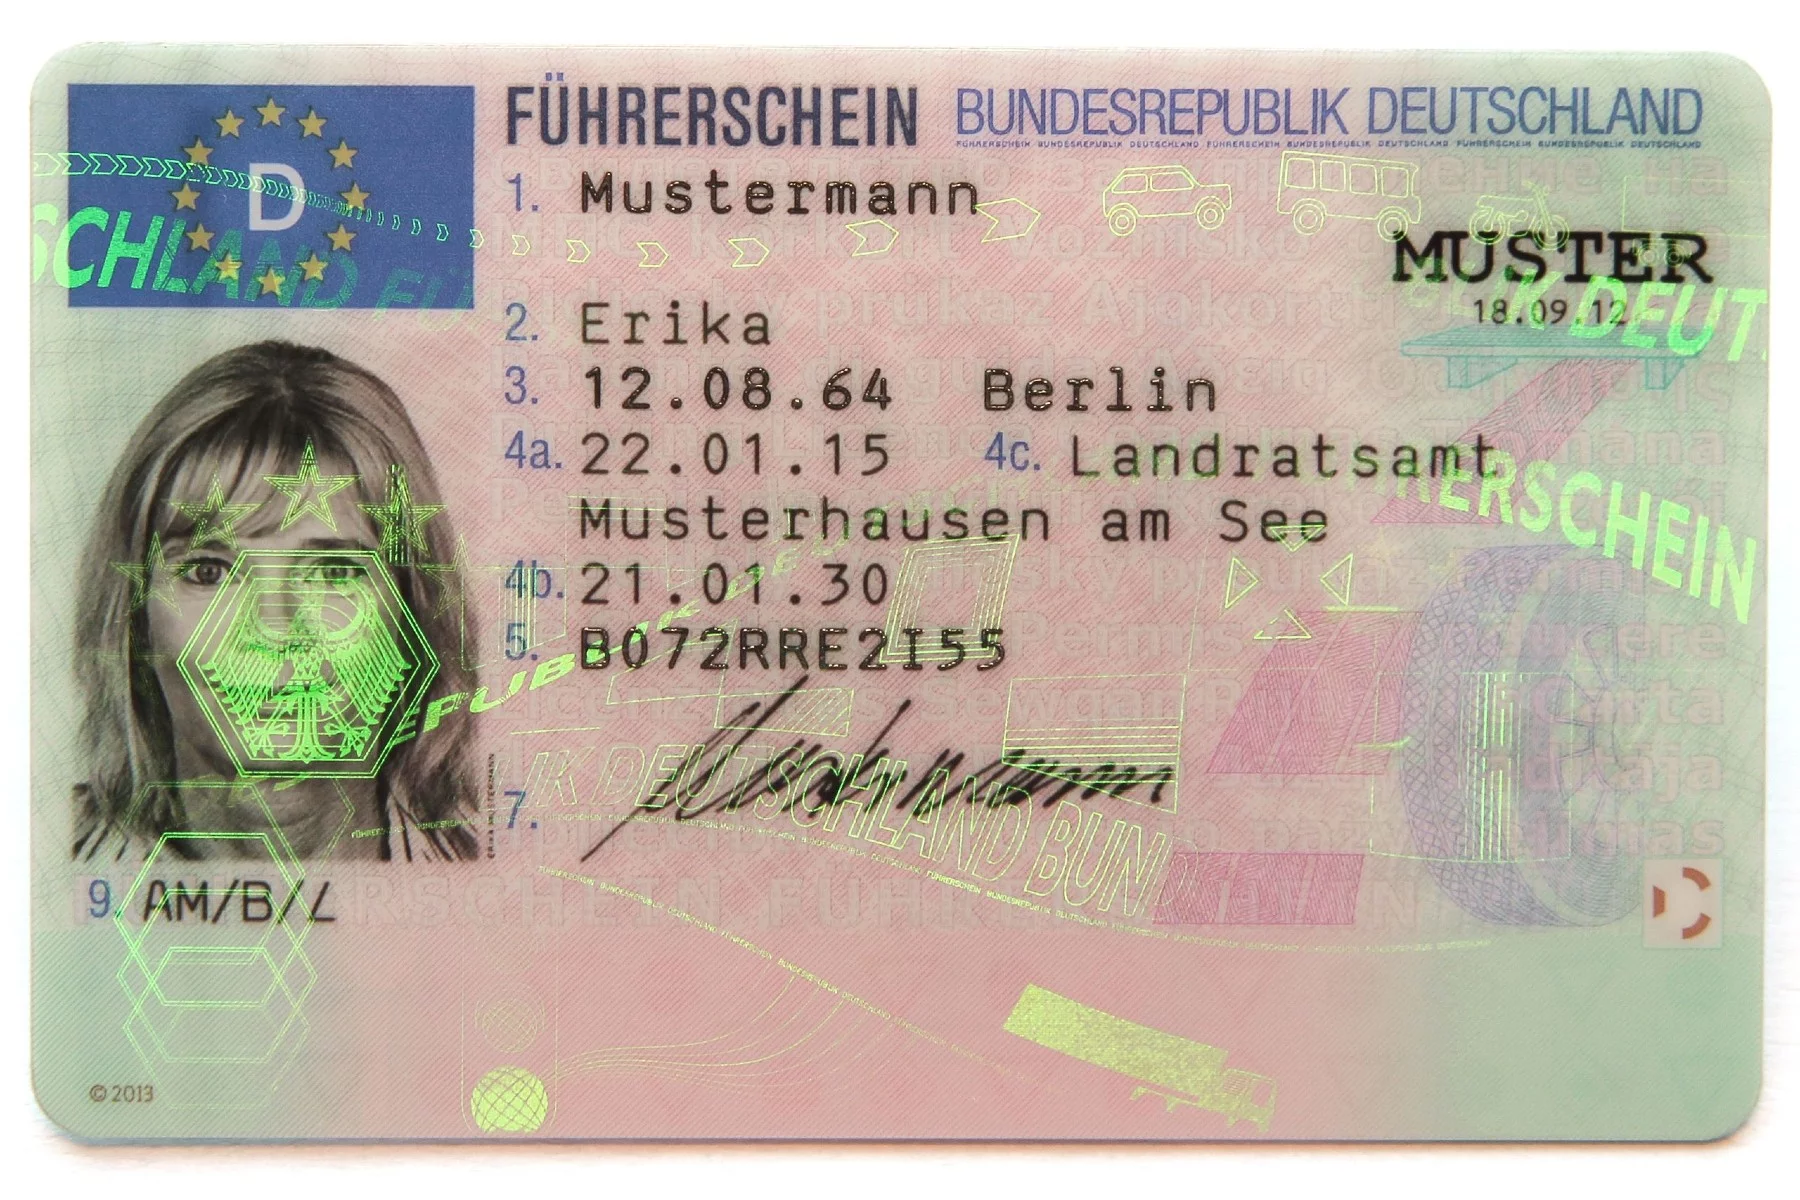 Typical driver's license in Germany